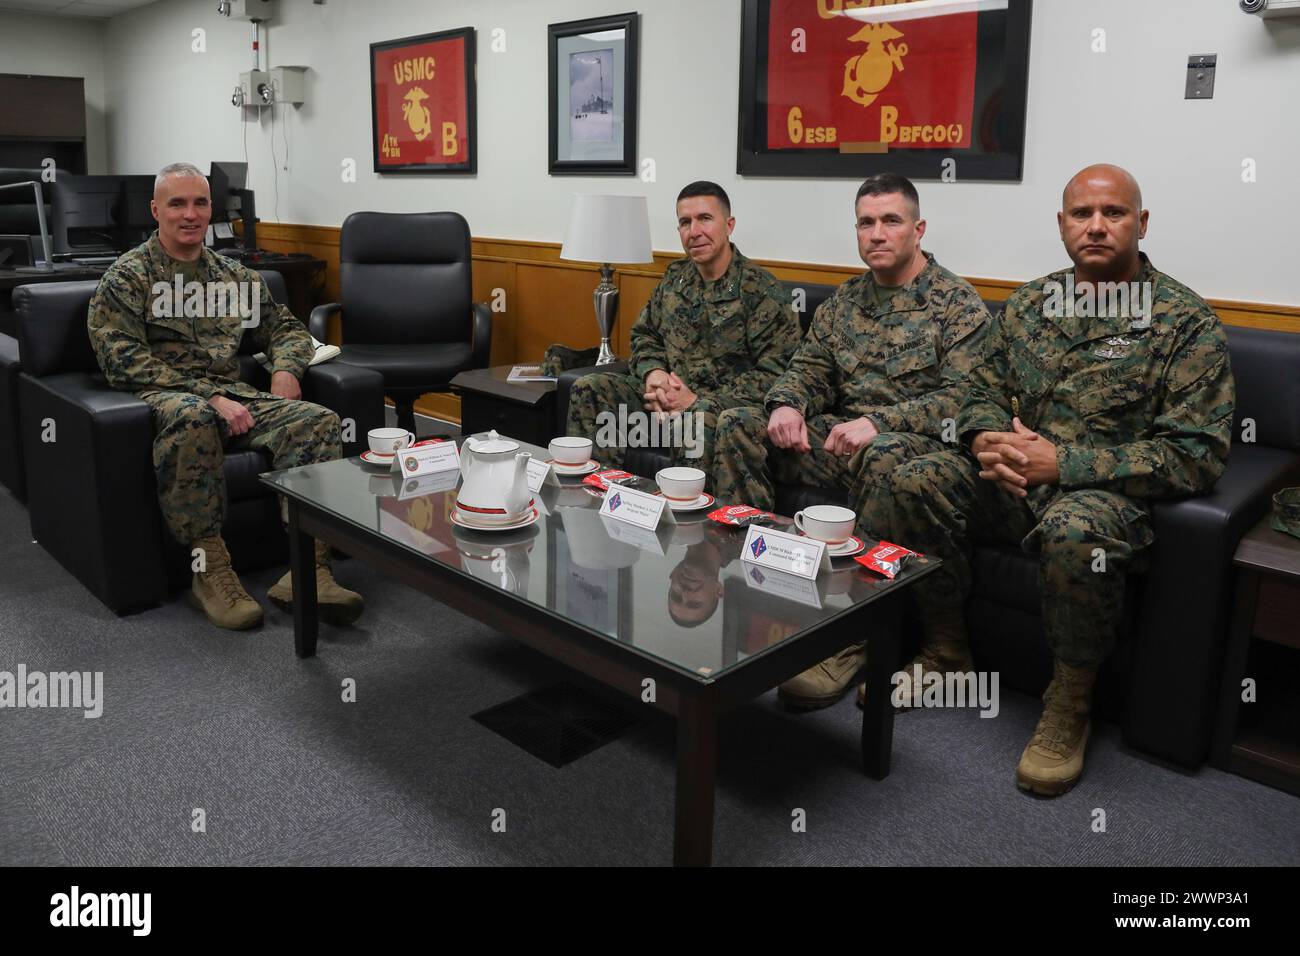 U.S. Marine Corps Maj. Gen. W. “Wes” E. Souza III (Left), Commanding General for U.S. Marine Forces Korea, hosts an office call for Maj. Gen. Benjamin T. Watson (second from left), Commanding General for 1st Marine Division, Sgt. Maj. Matthew J. Fouss (second from right), Command Sgt. Major for 1st Marine Division and Command Master Chief  Richard E. Bolton, Command Master Chief for 1 Marine Division, Feb. 29, 2024, U.S. Army Garrison Humphreys, Republic of Korea. MARFORK emphasizes the importance of constant communication between units, in order to commit to a stronger, more knowledgeable and Stock Photo